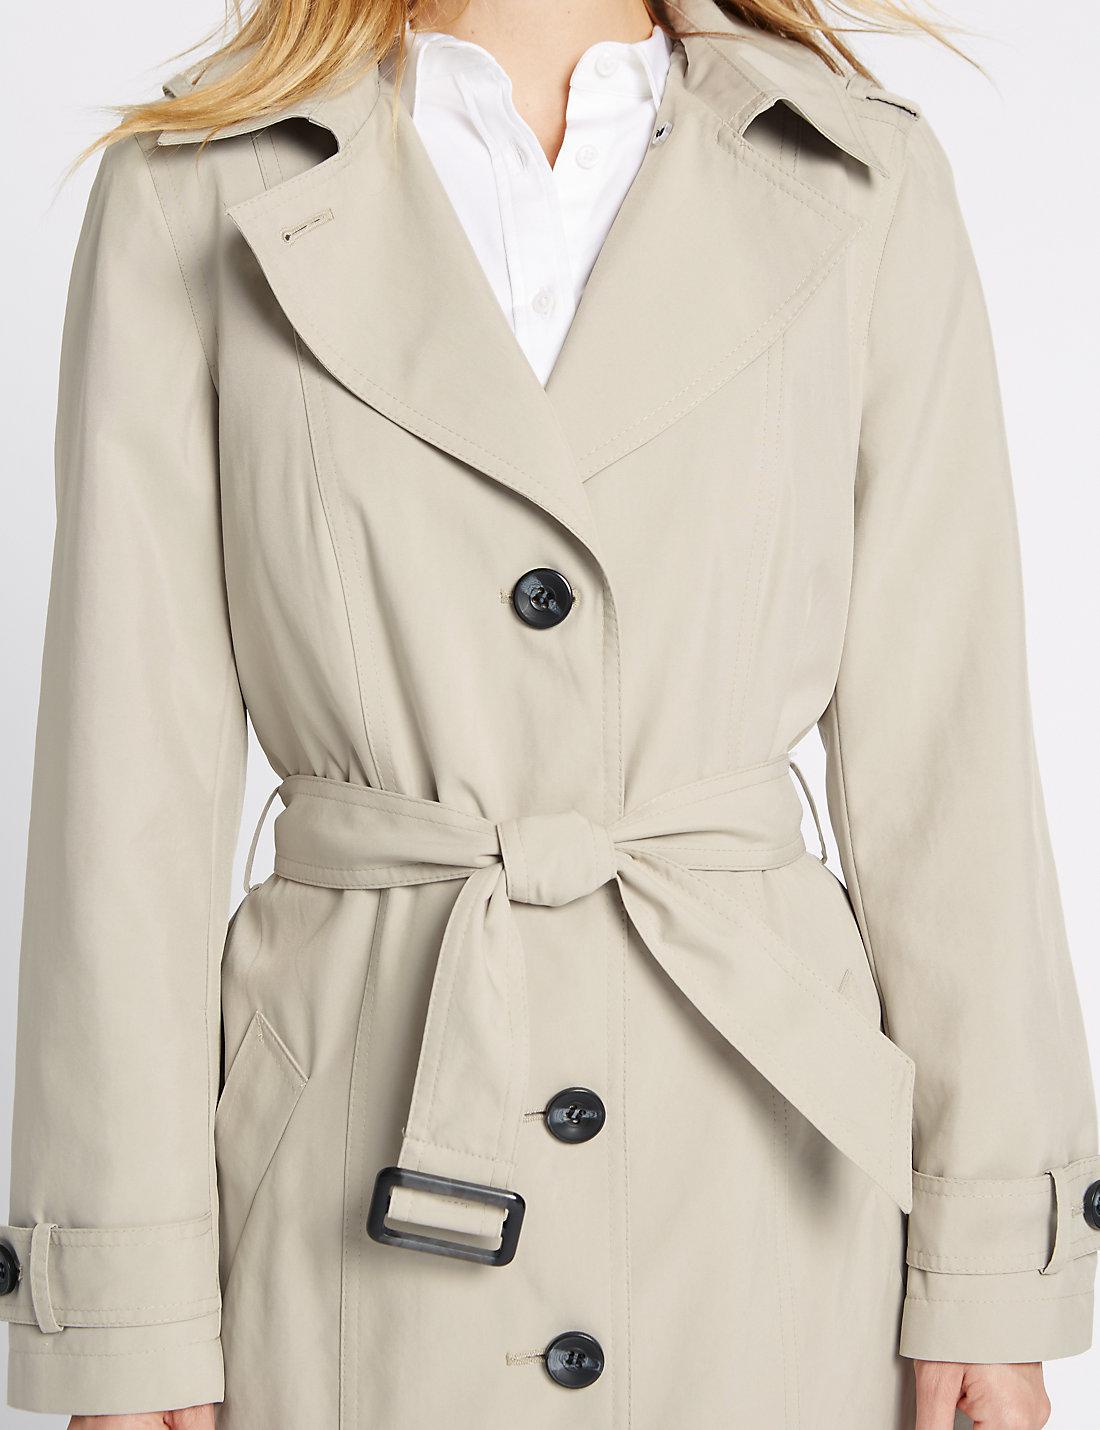 M&s Petite Trench Coat Online Sale, UP TO 65% OFF